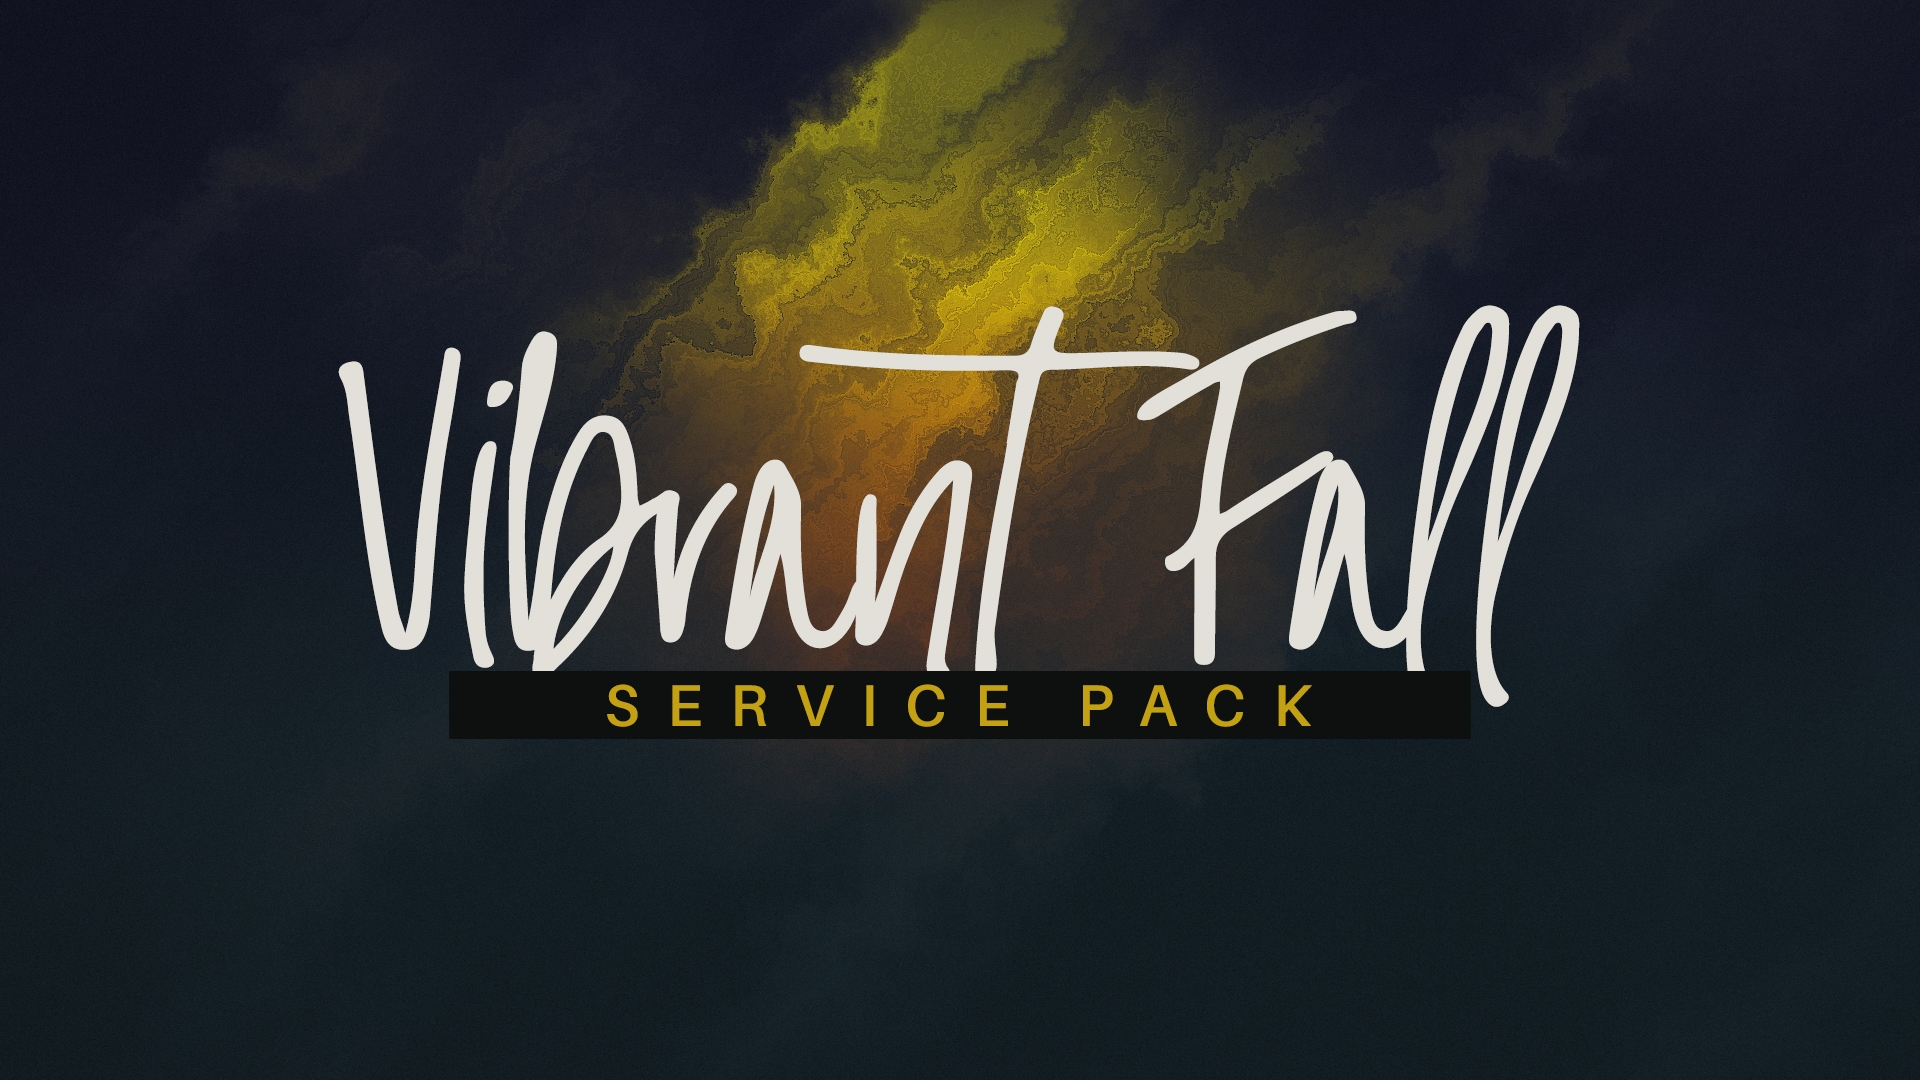 Vibrant Fall Service Pack